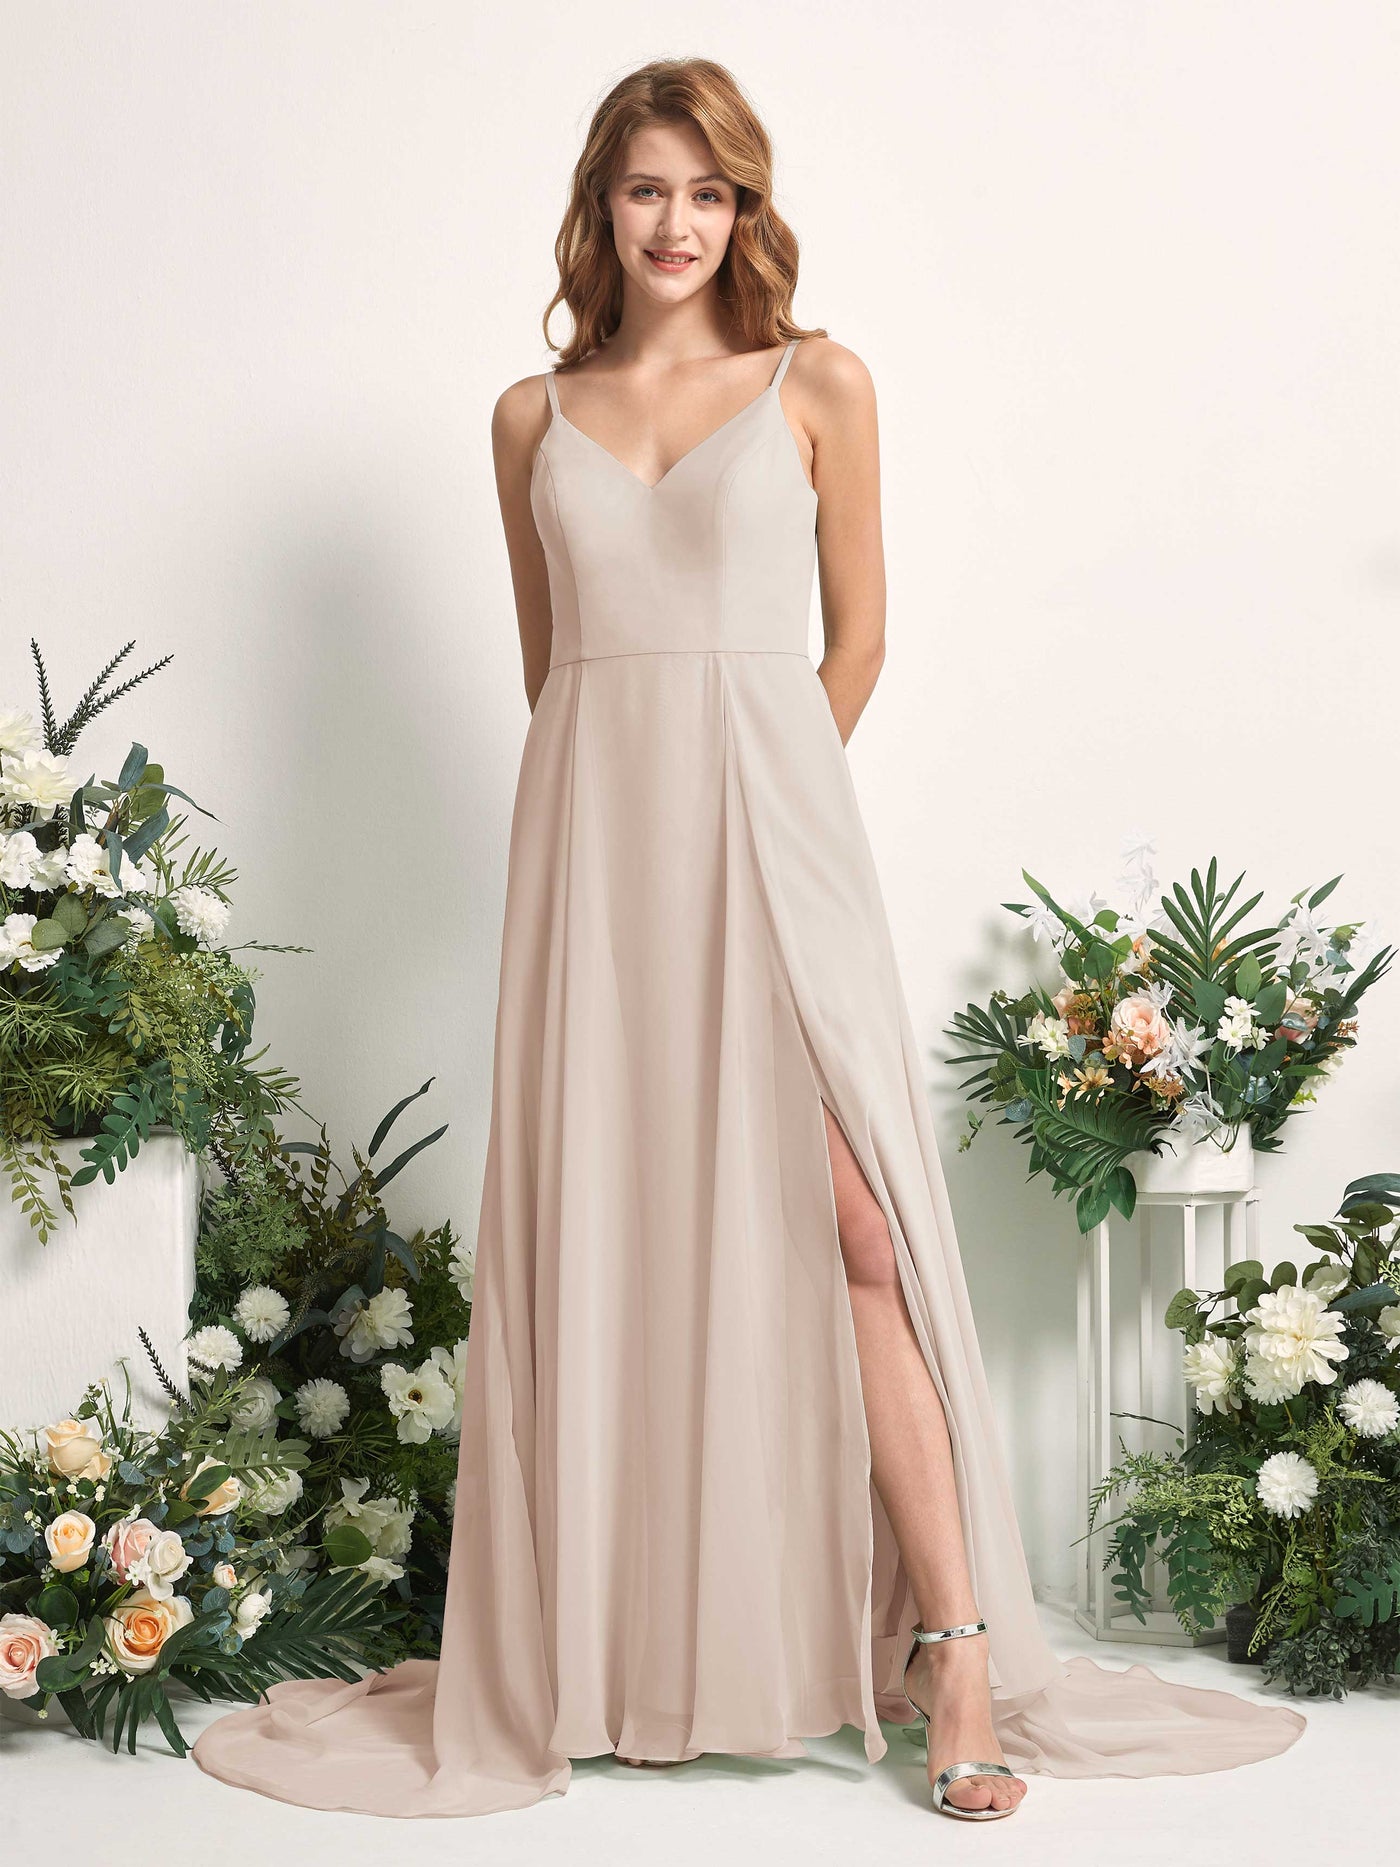 Bridesmaid Dress A-line Chiffon Spaghetti-straps Full Length Sleeveless Wedding Party Dress - Champagne (81227716)#color_champagne